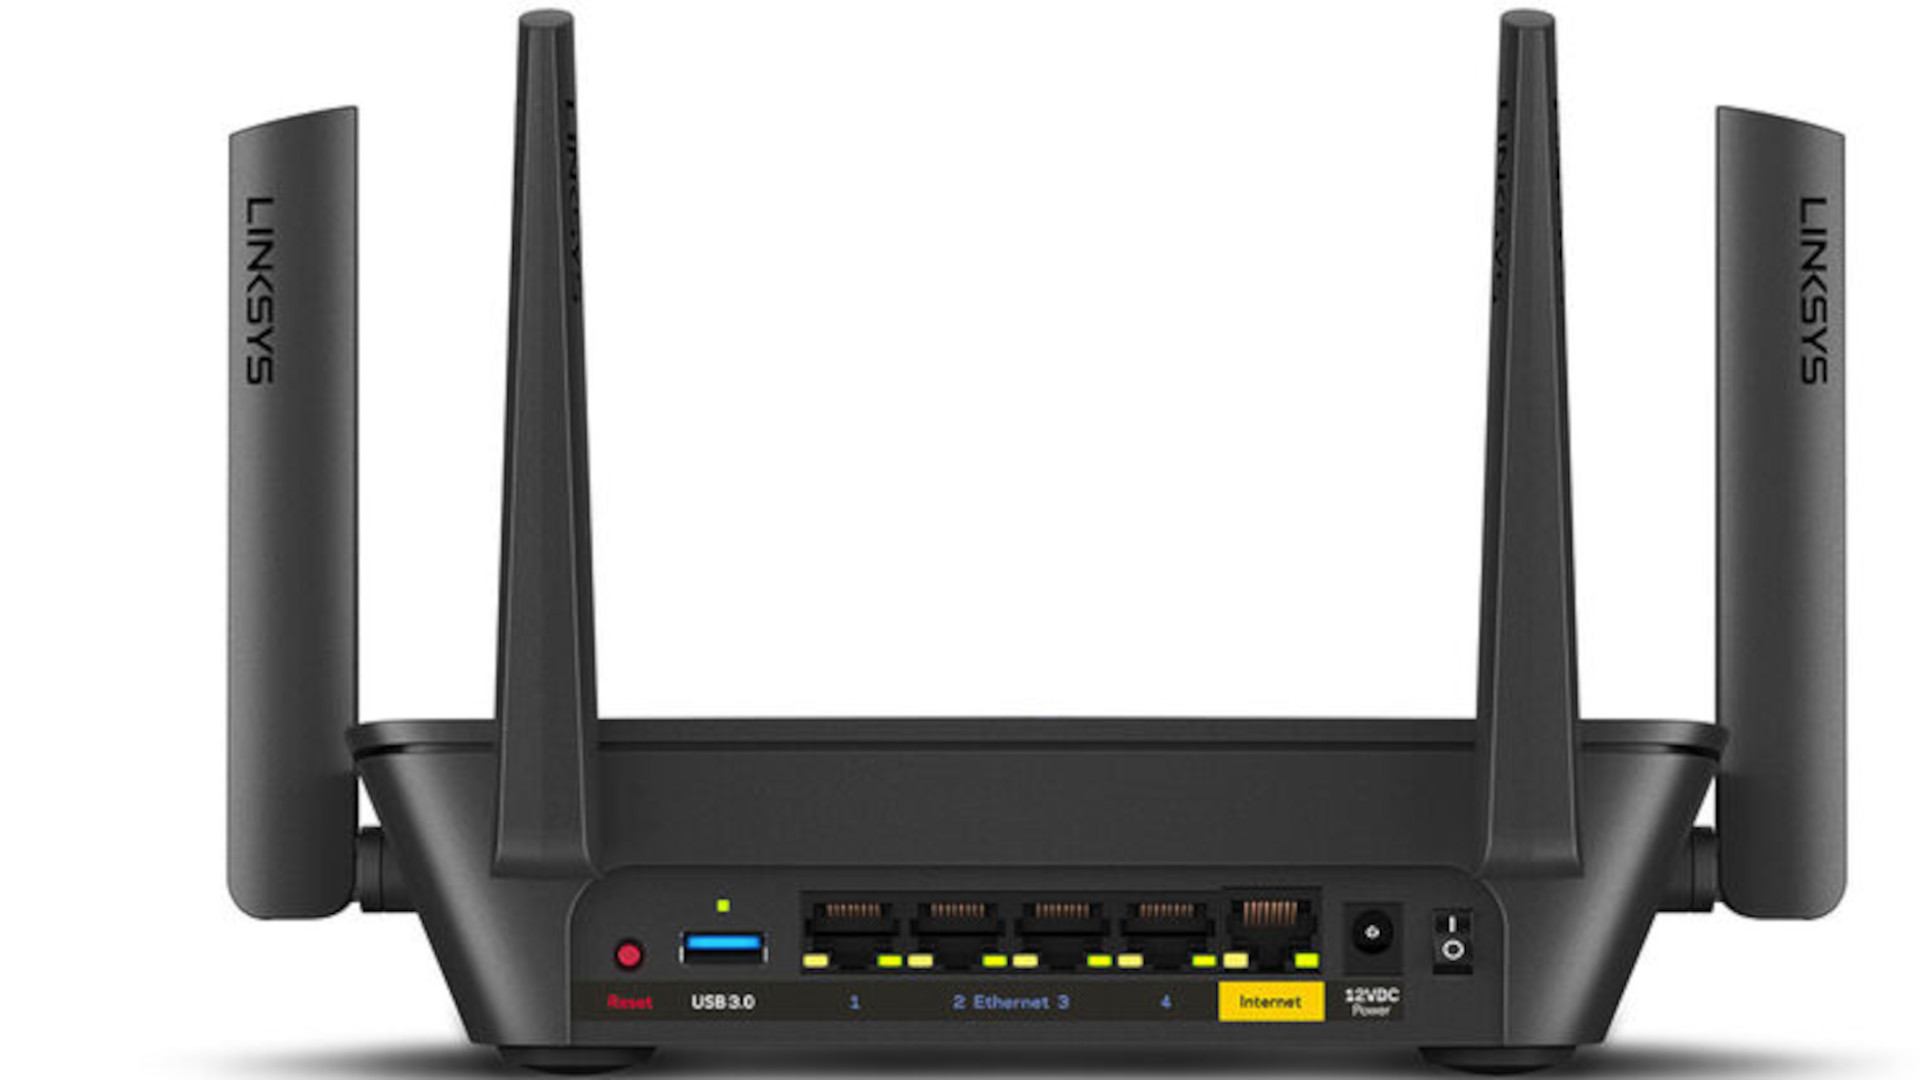 LINKSYS AC2200 MR8300 Router 3